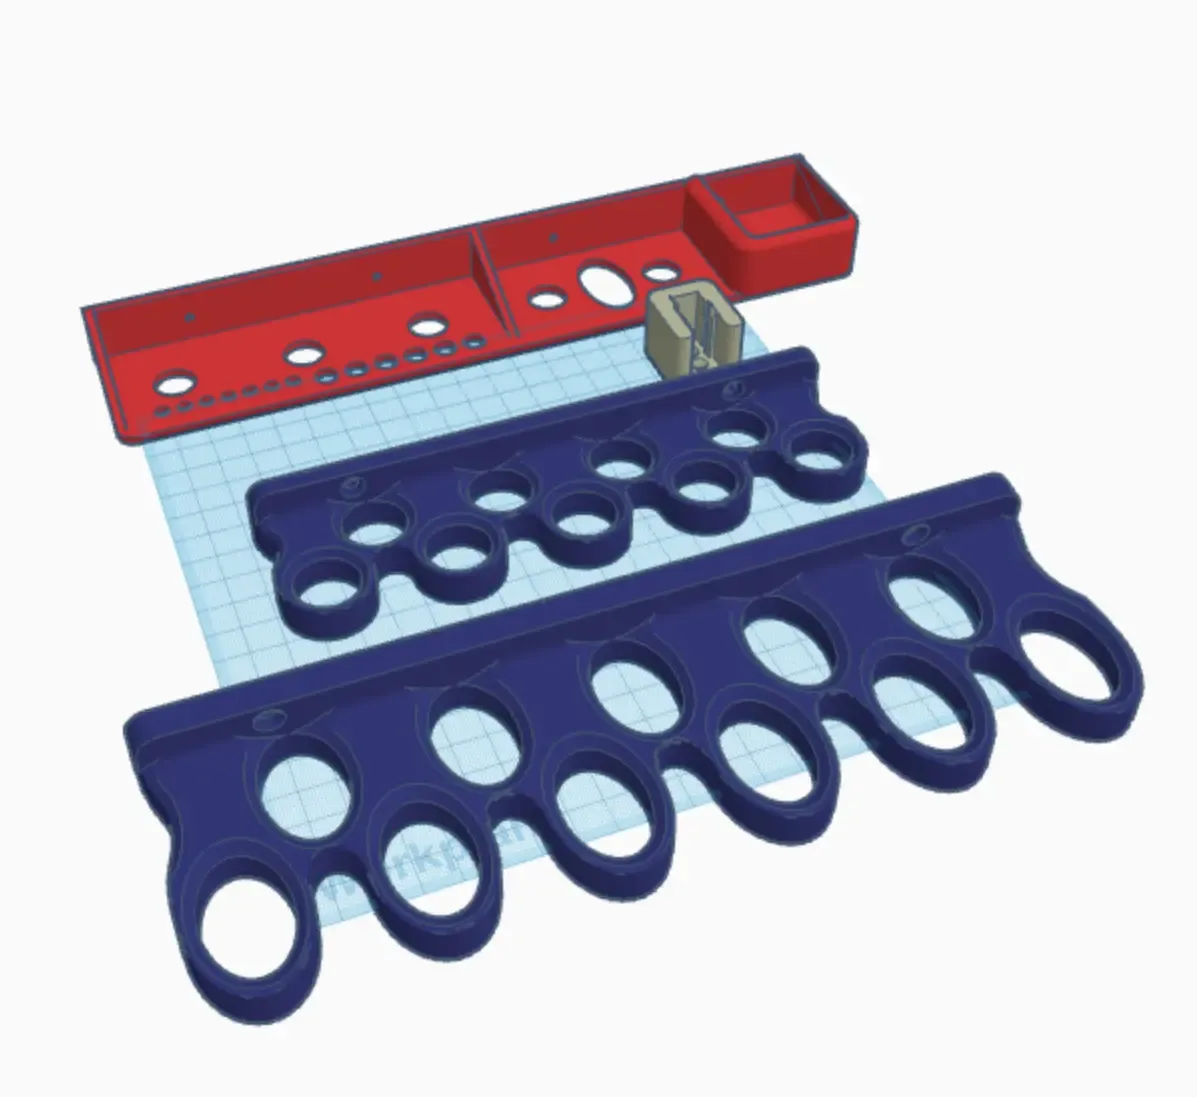 Tool holder and air tools bracket